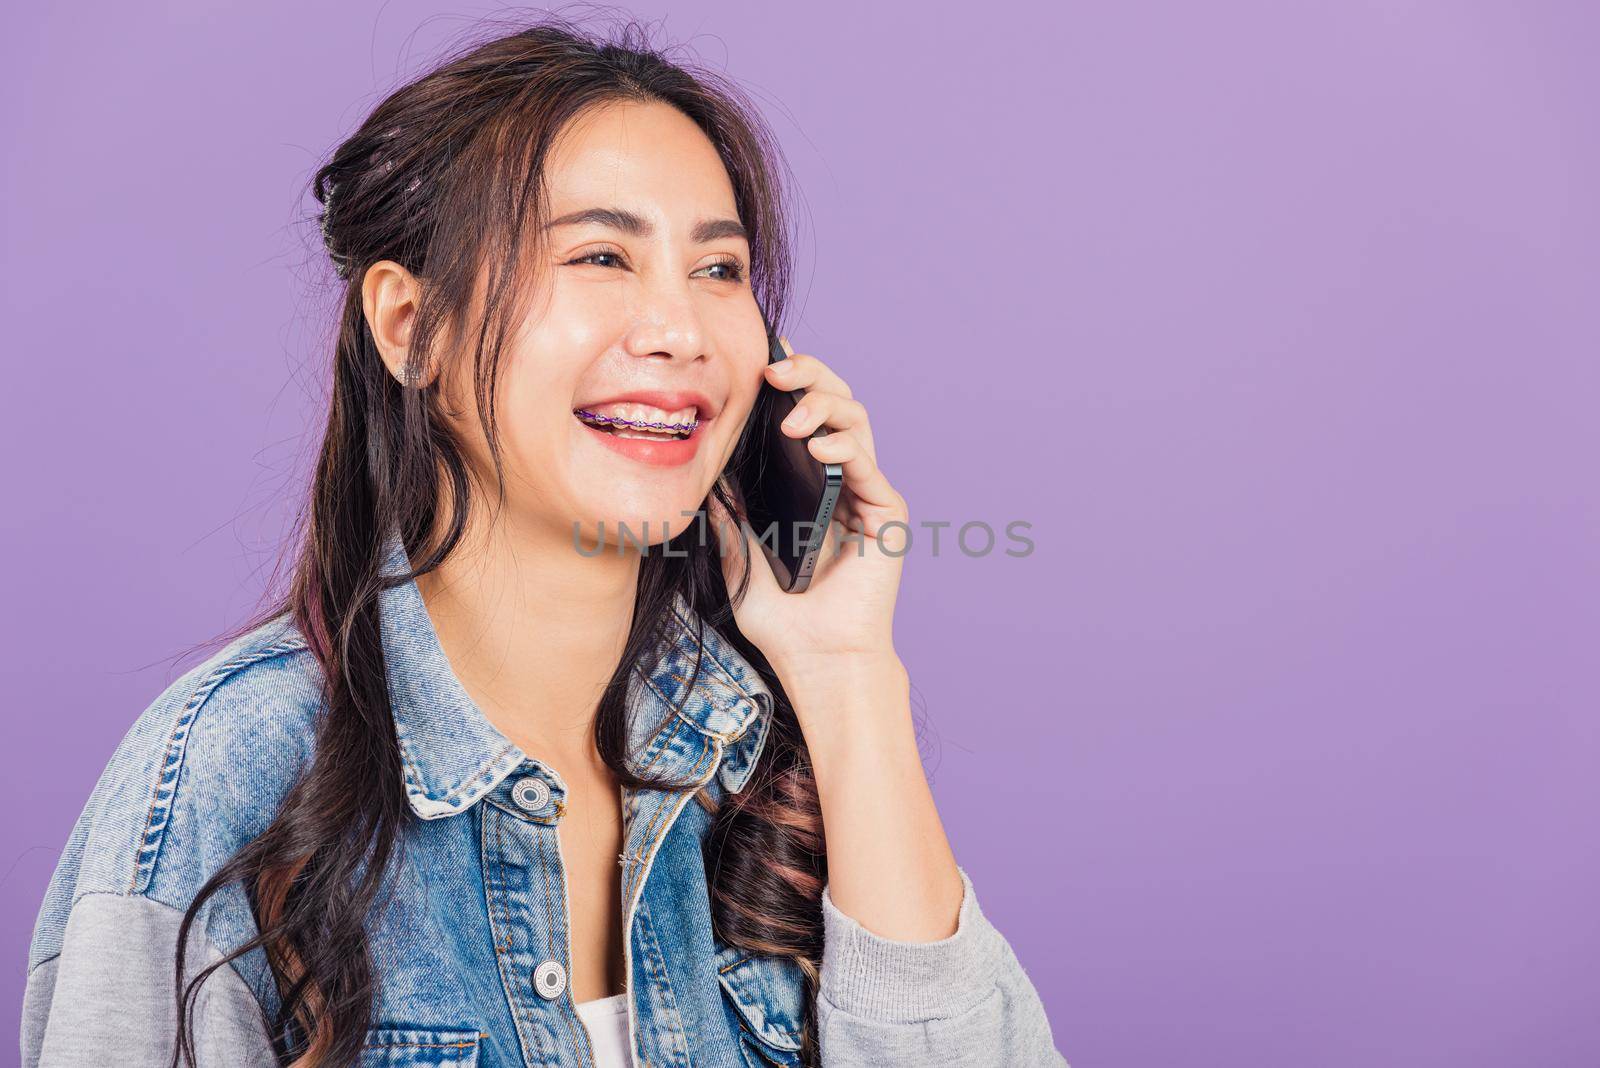 
Portrait of Asian beautiful young woman confident smiling on phone call with smartphone, Happy lifestyle female teen calling and talking to her friends, studio shot isolated on purple background